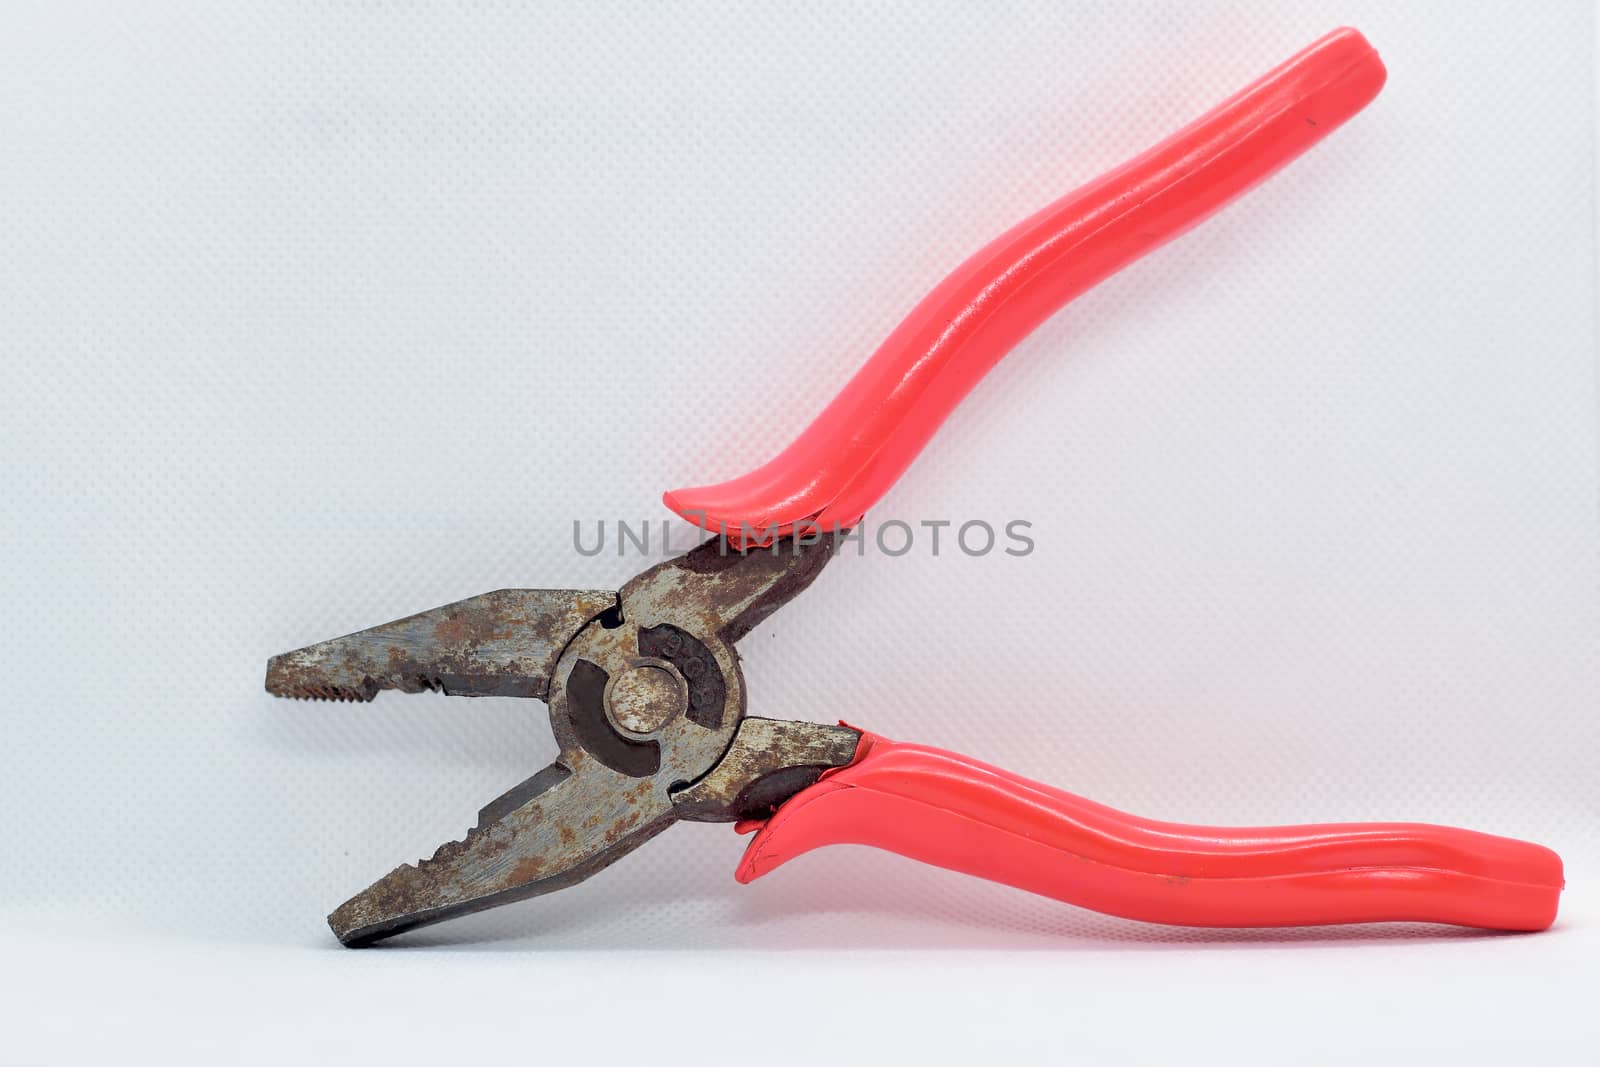 Diagonal cutting pliers are used for cutting wires, screws and nails